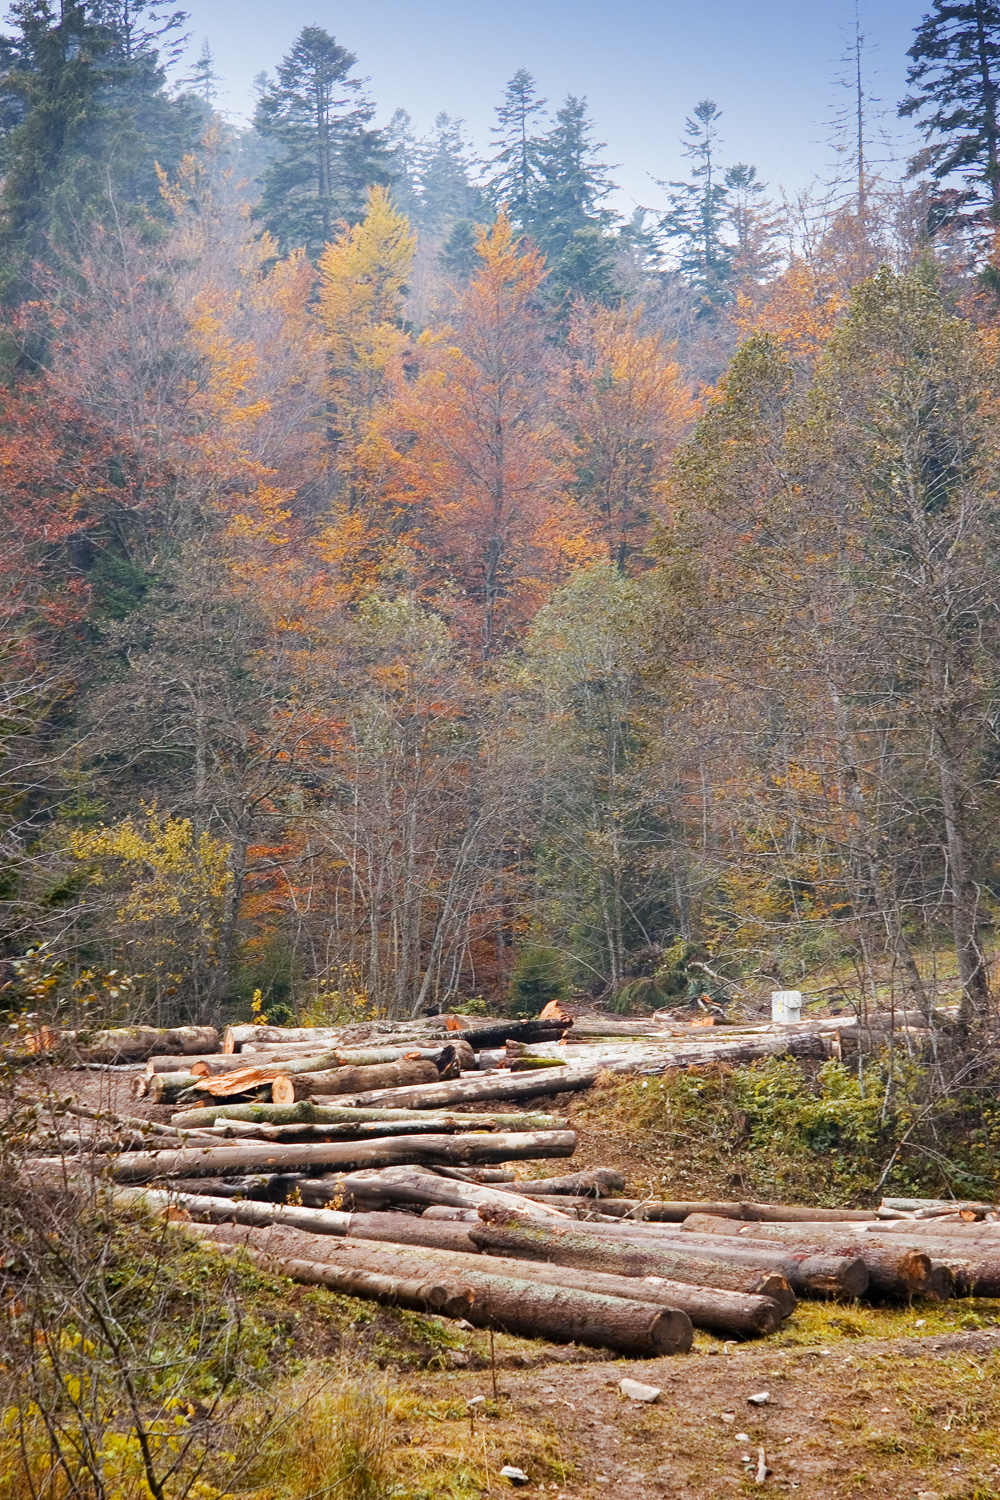 Fesh harvested logs in the forest